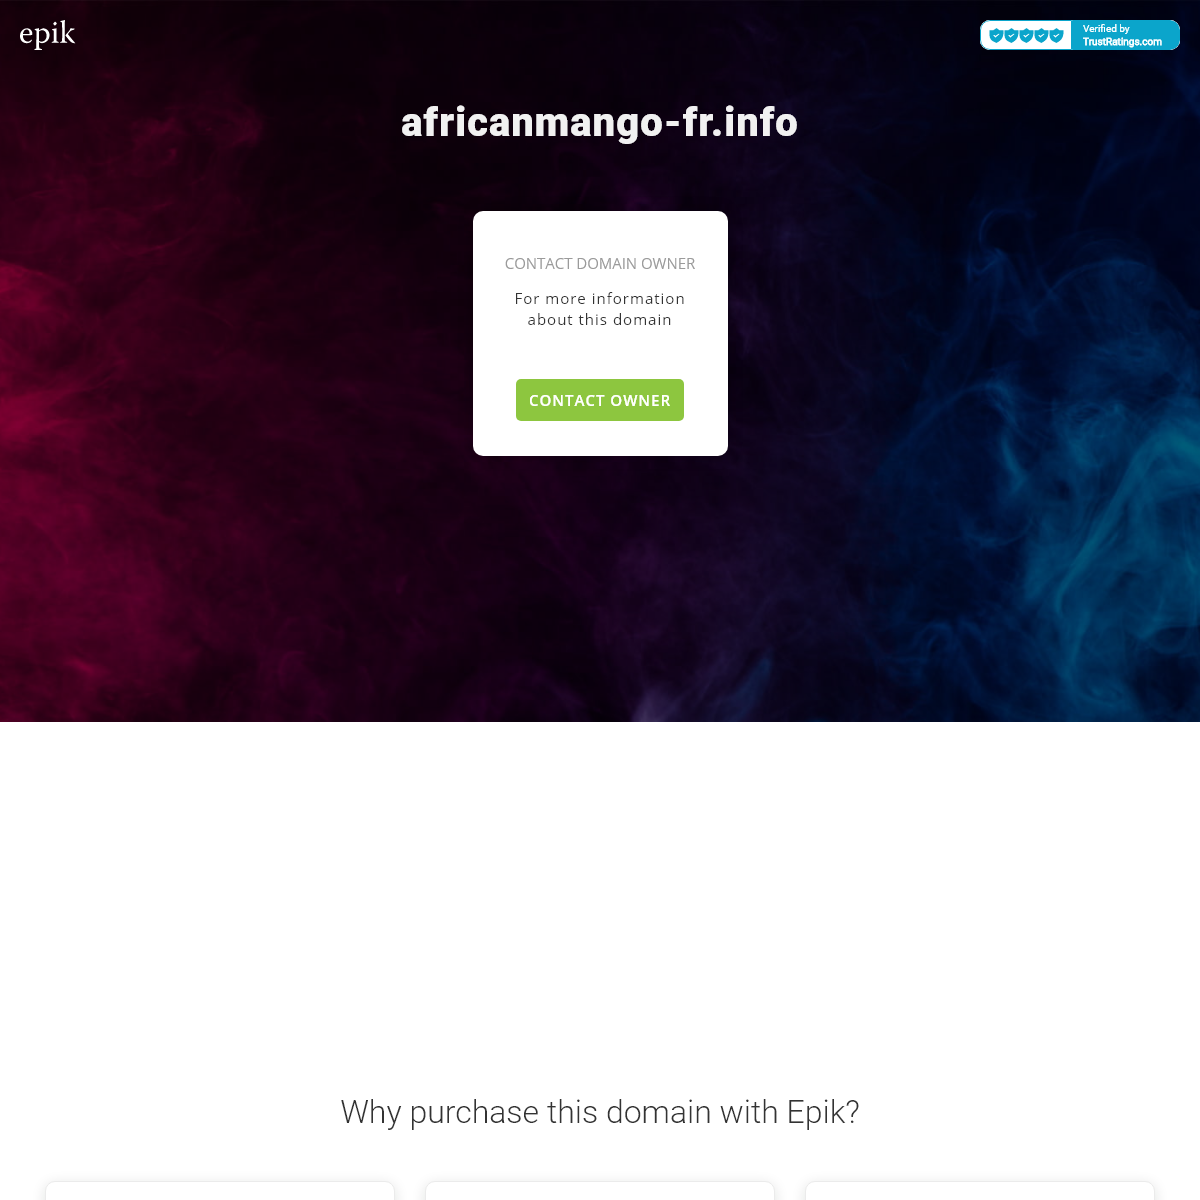 A complete backup of africanmango-fr.info